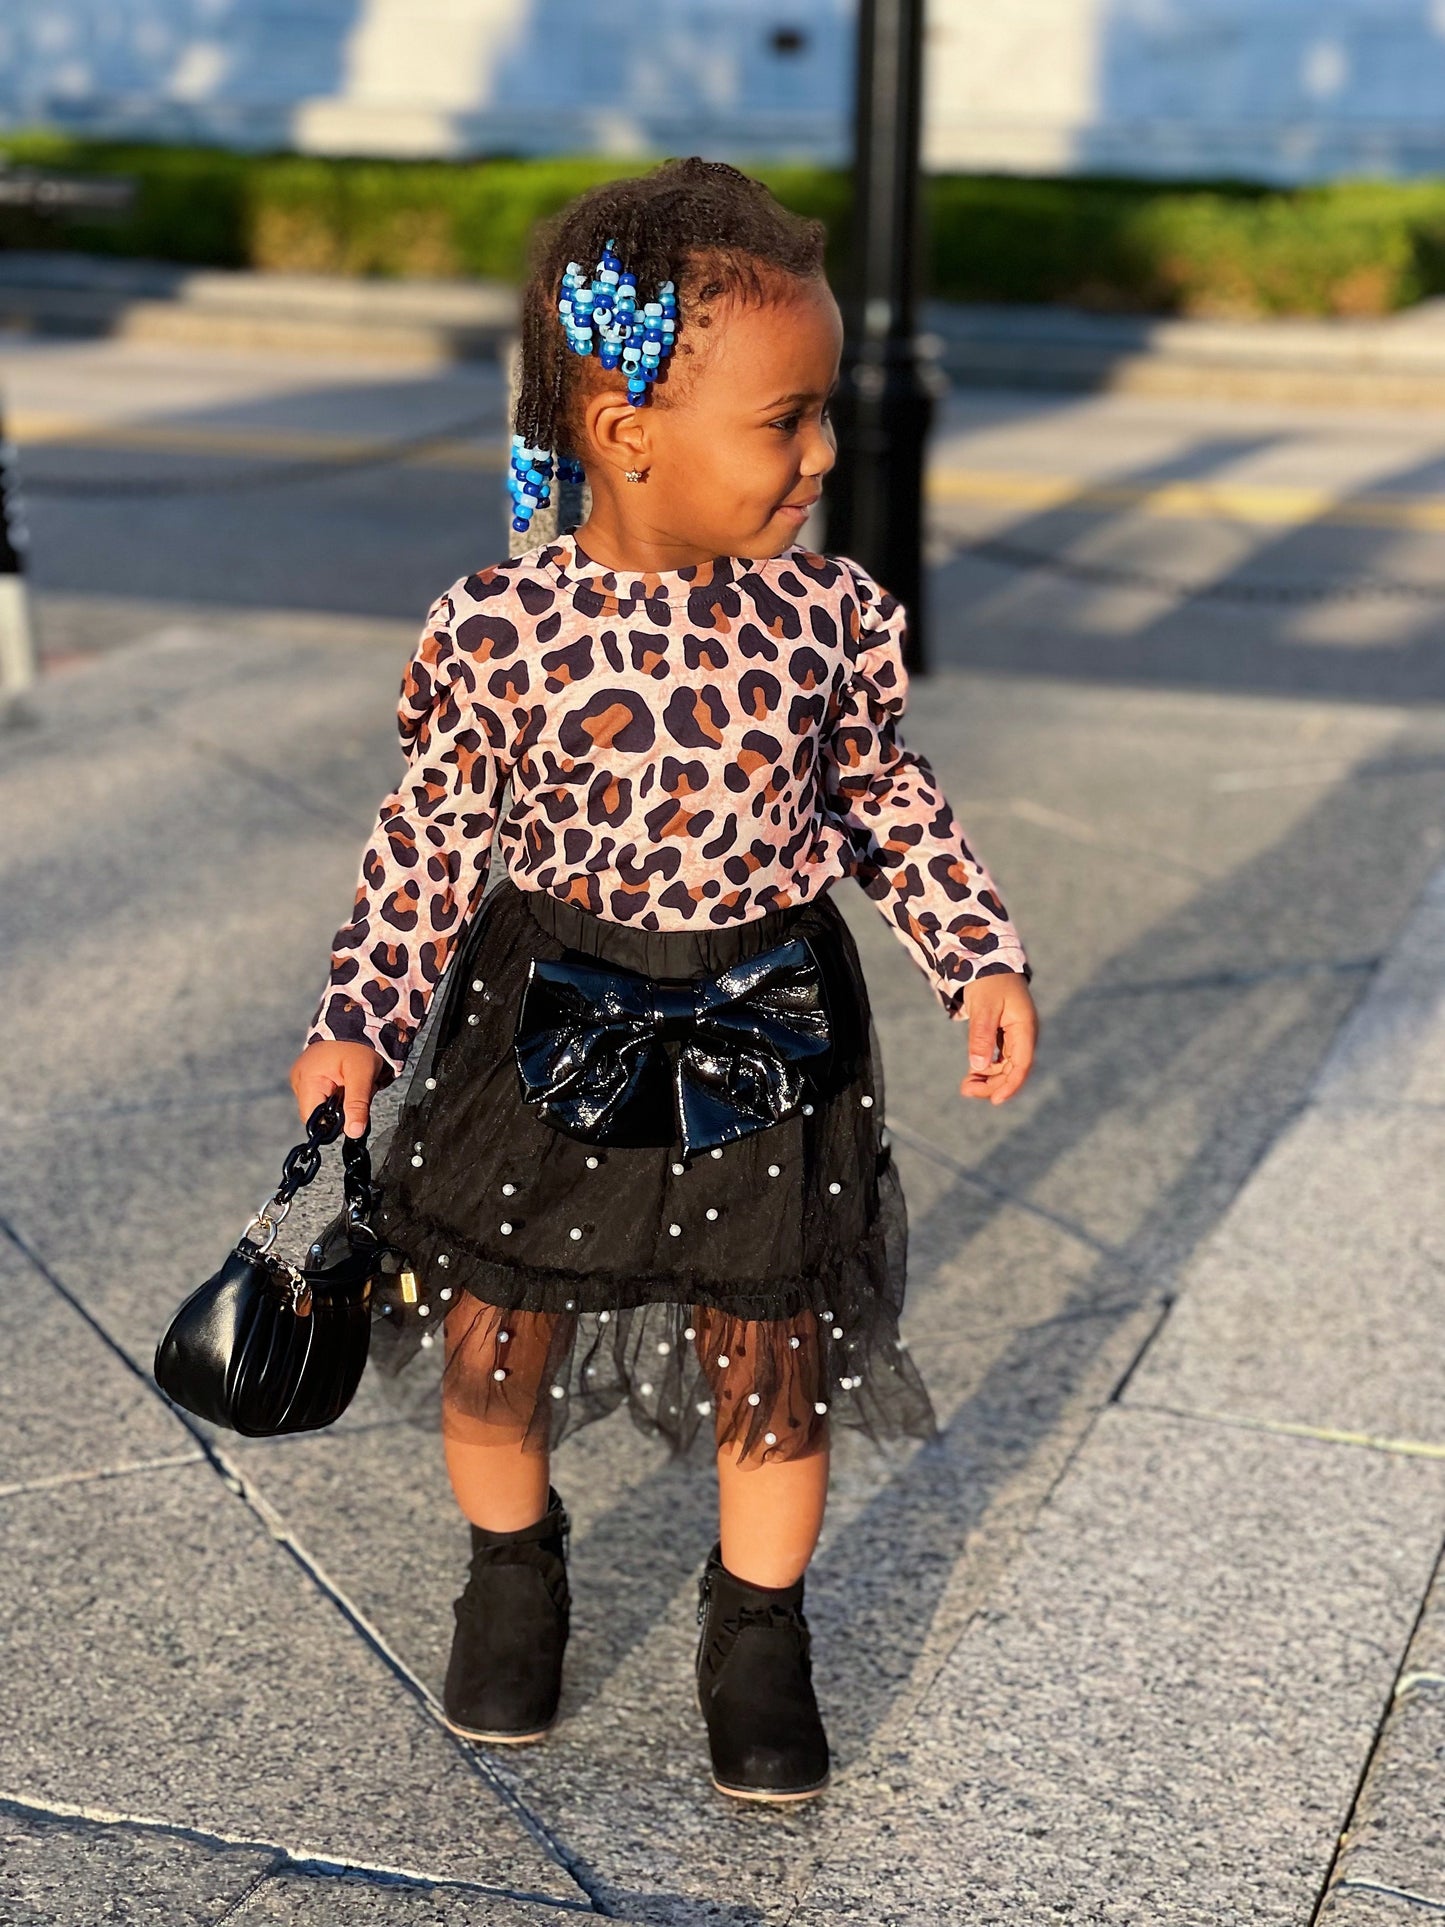 Leopard Print Baby Girl Clothes | The Cheetah Girl Set | PS Love Tima 12M